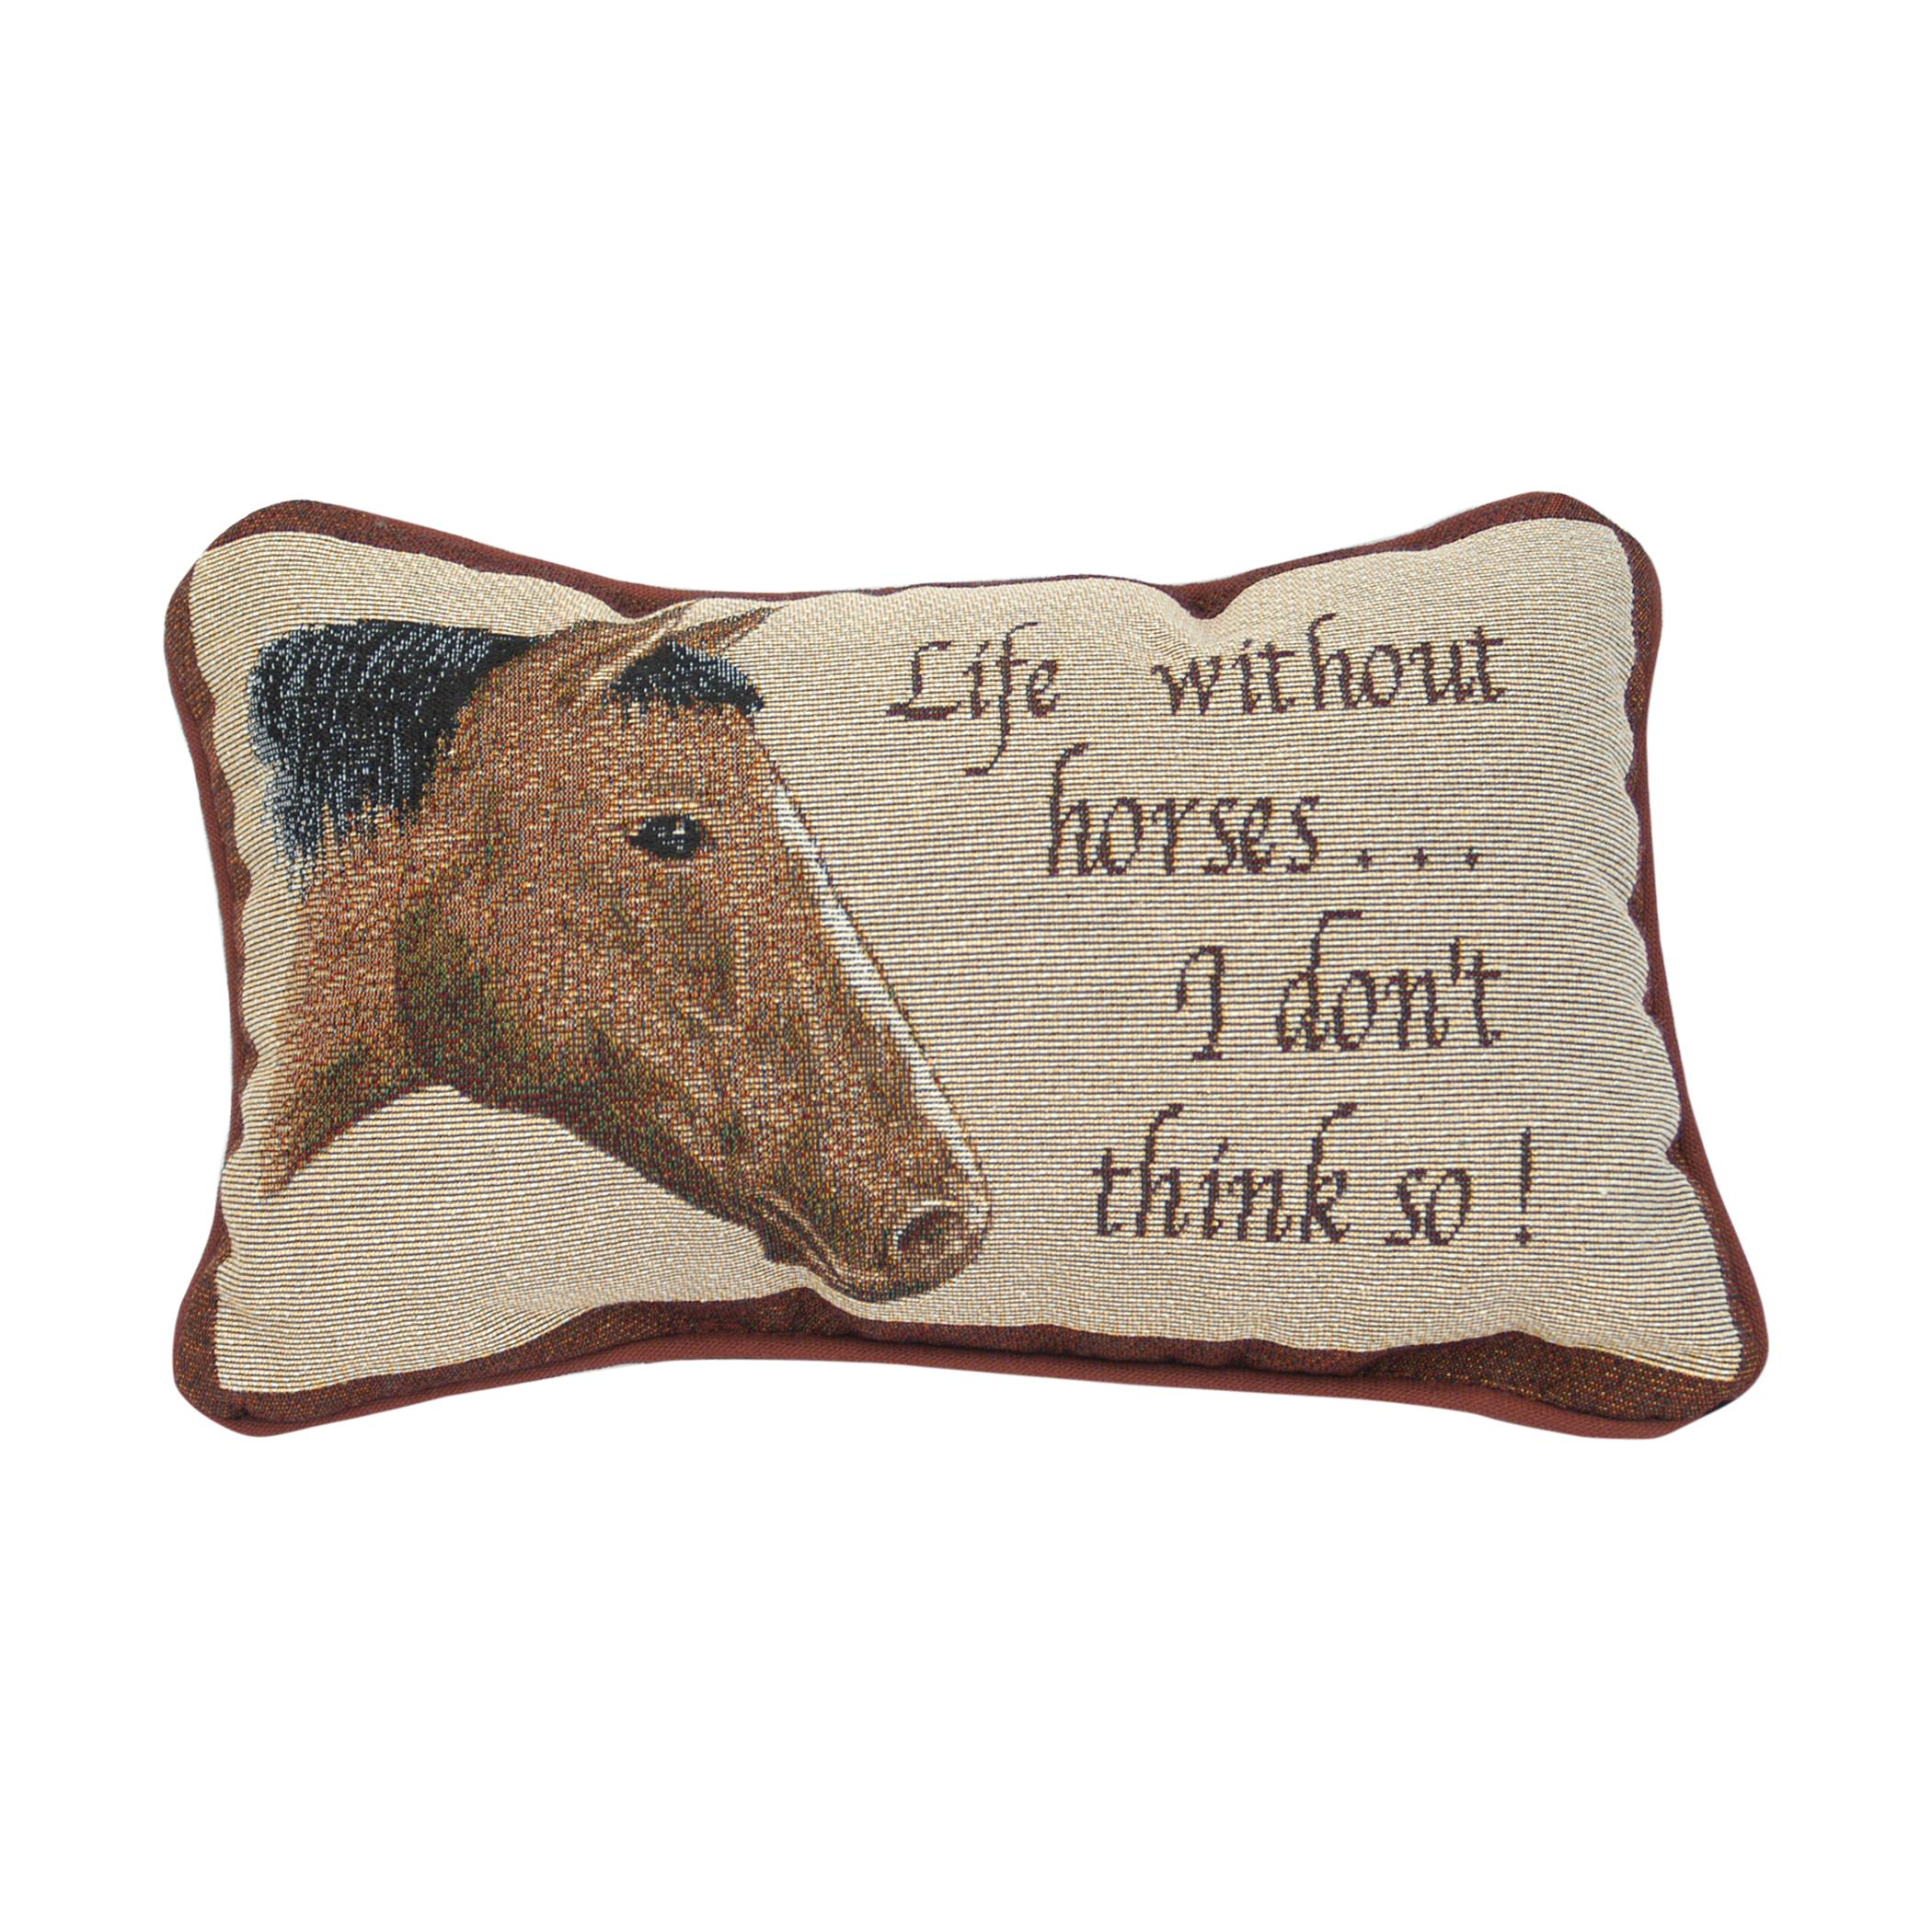  Life Without Horses Decorative Accent Pillow